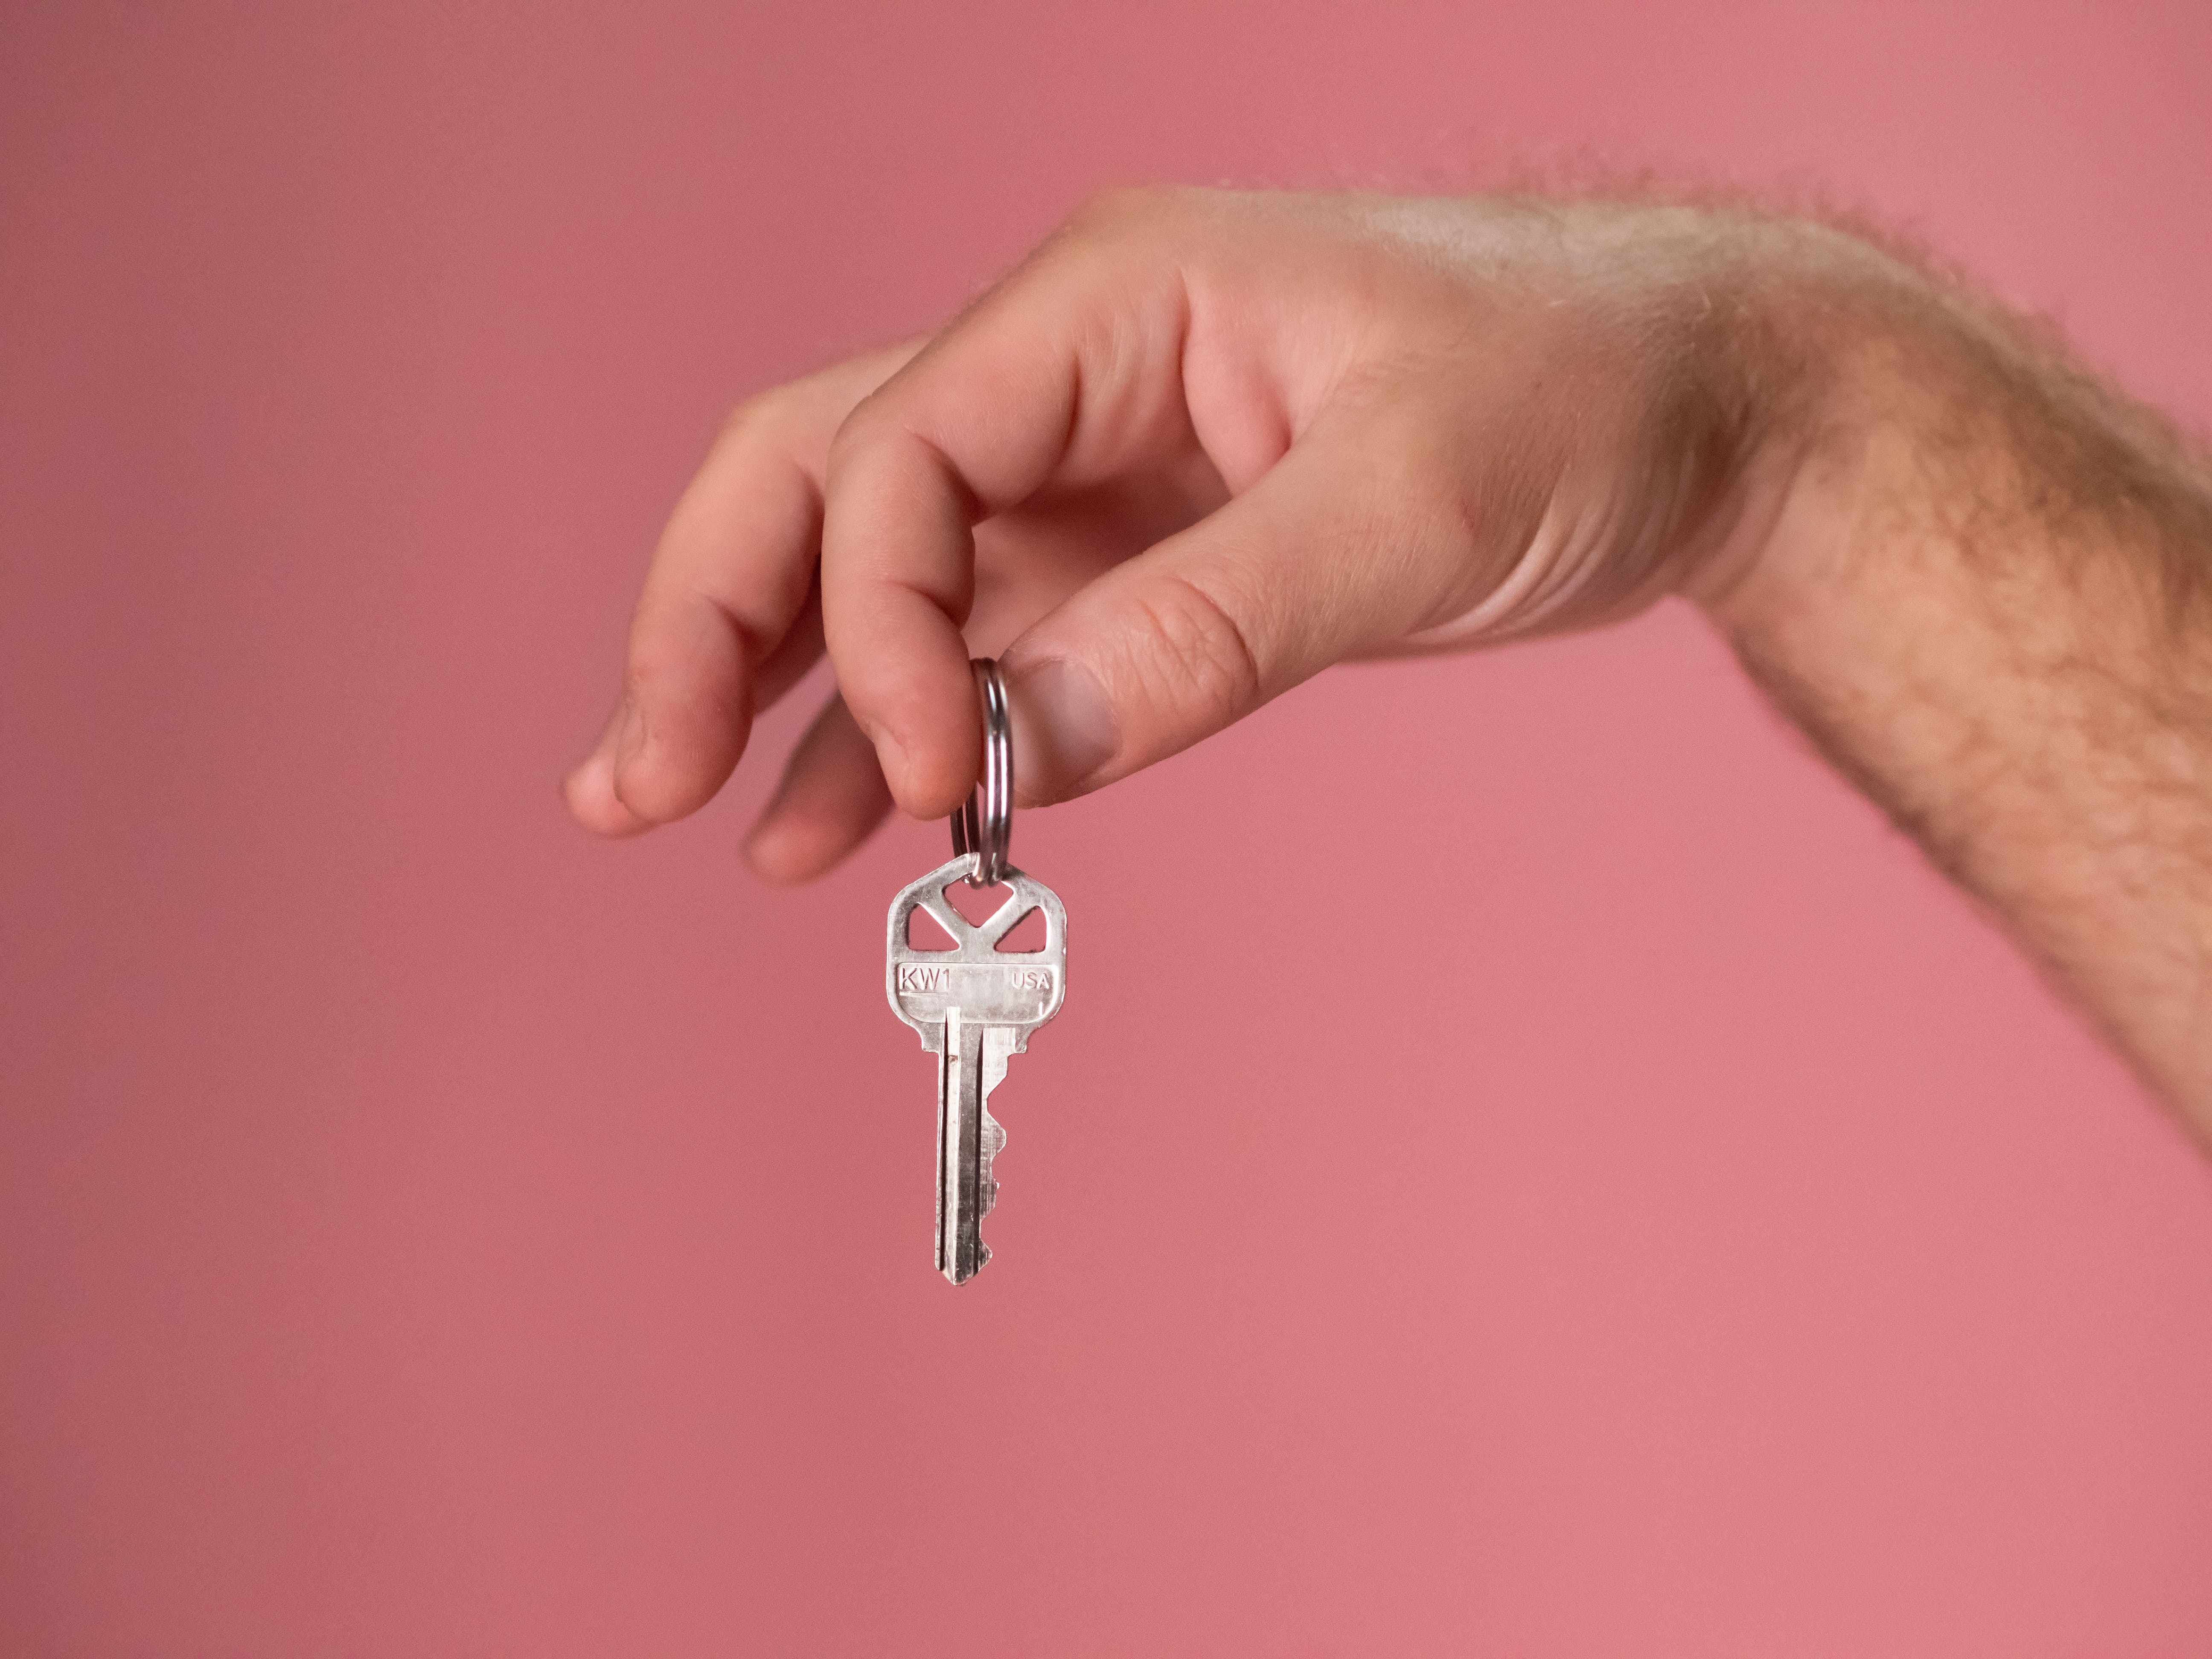 A close-up image of a person's right hand, with light skin tone, holding a silver key with a bow labeled 'KW1'. The key is displayed prominently against a plain pink background, filling the central area of the frame. This visual metaphorically represents the concept of security and access, akin to the process of learning how to create and use SSH keys for secure remote access.